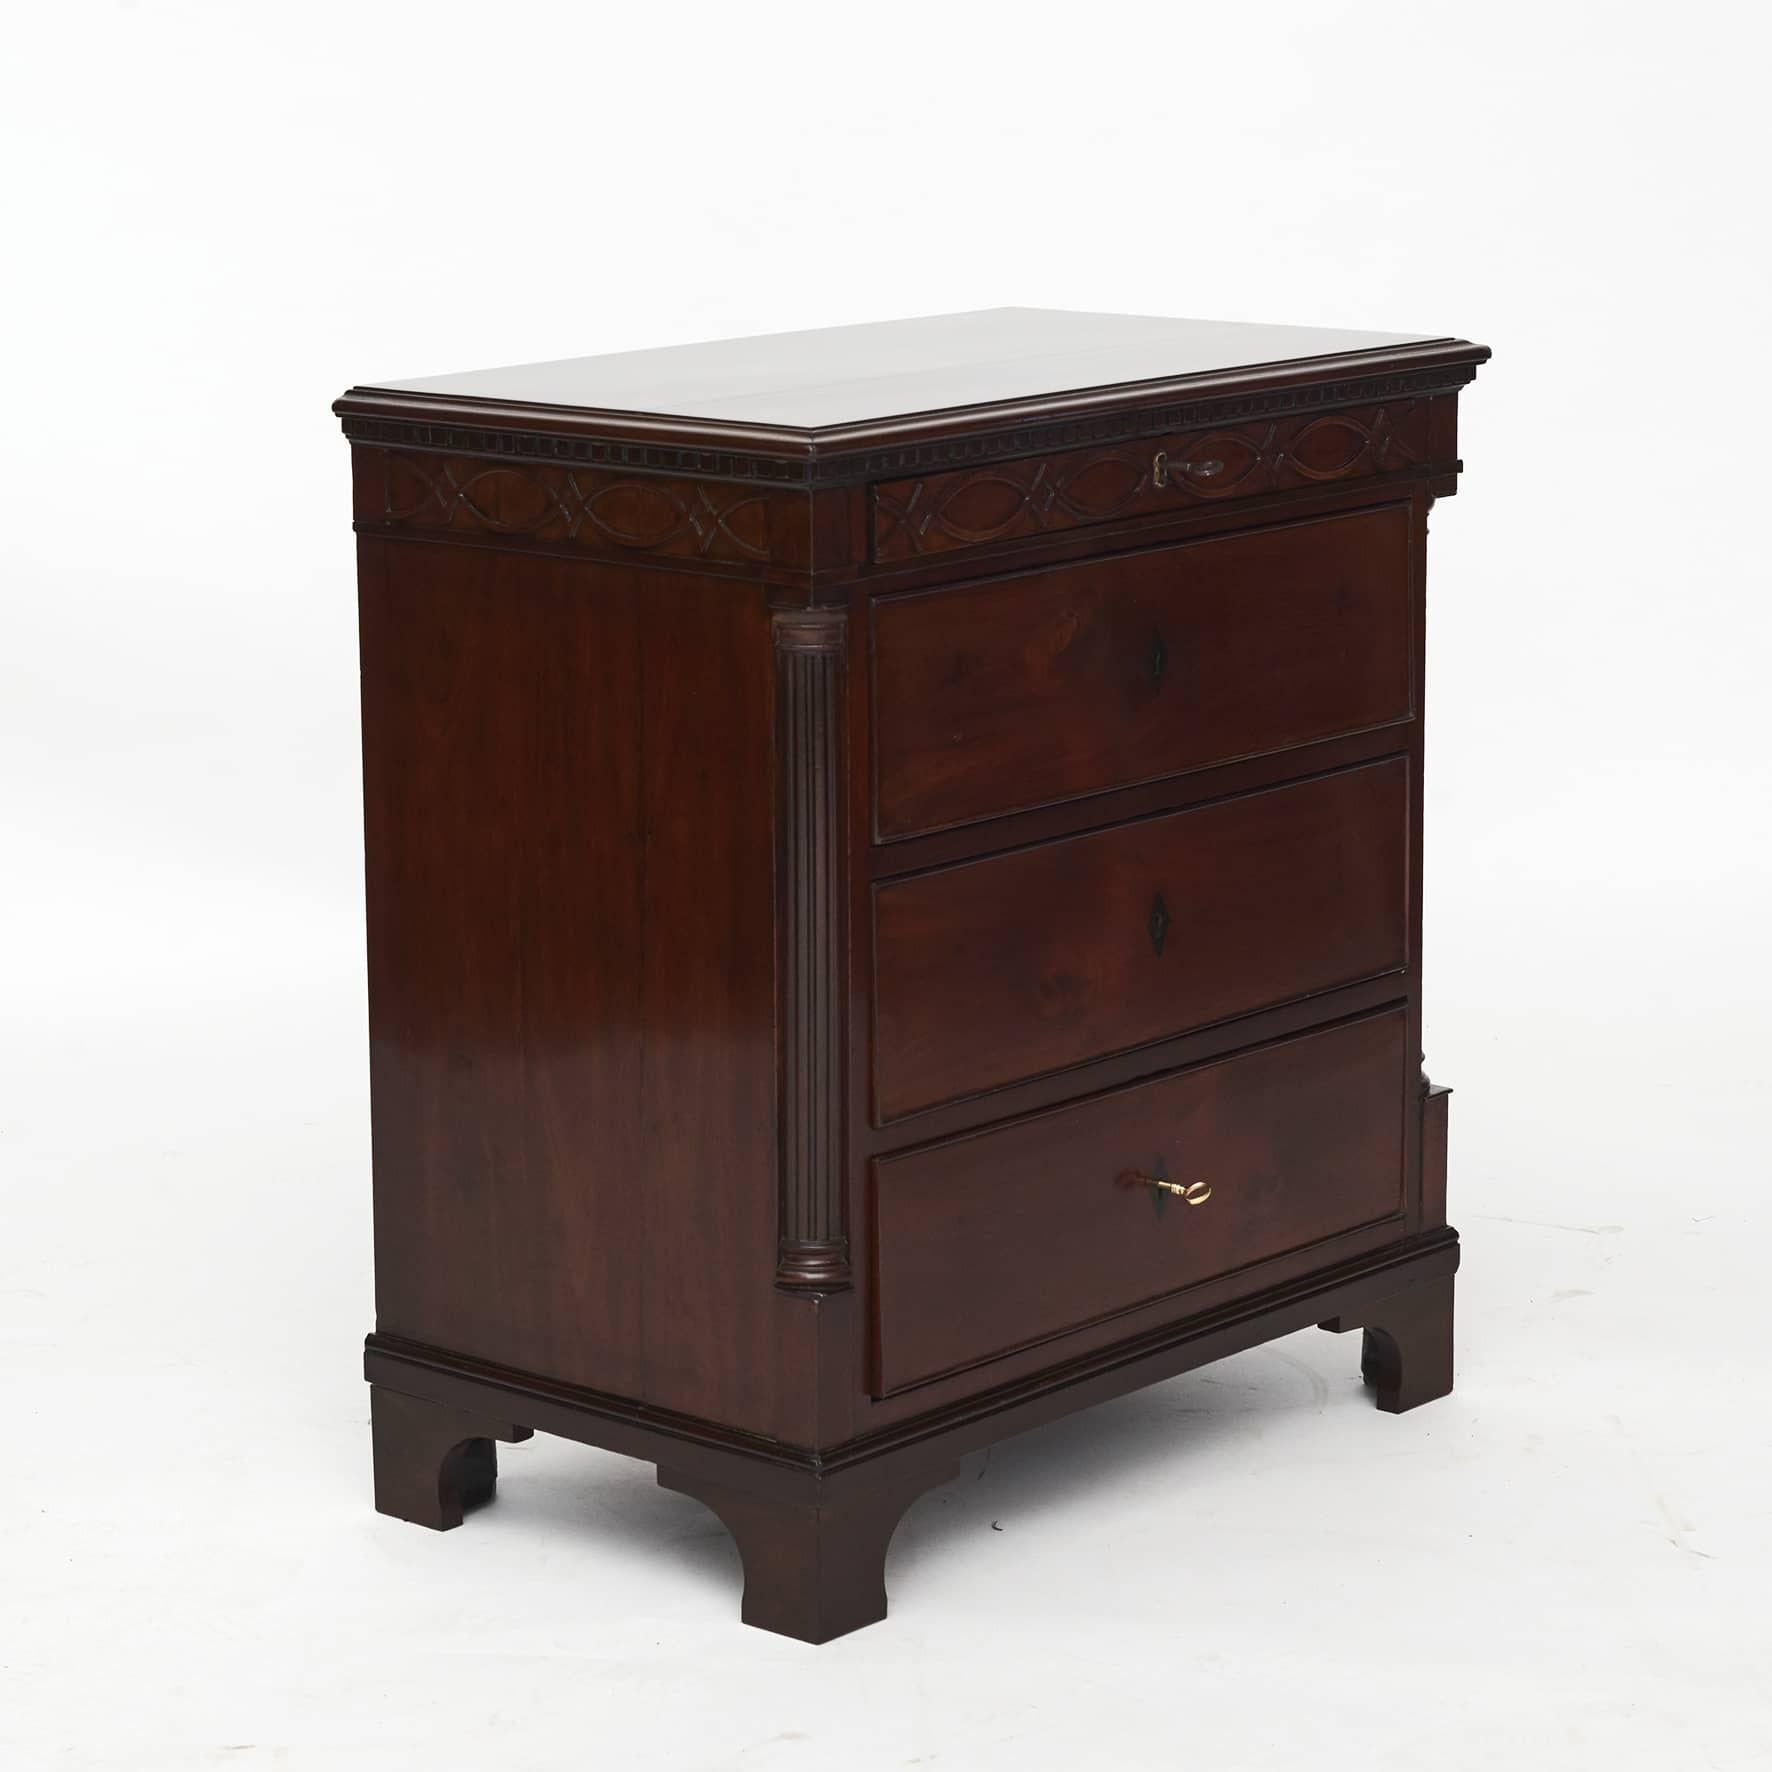 Louis XVI chest, Mahogany with 4 drawers.
Carved dentil under top plate.
Top drawer and sides with geometric molding work.
Sides flanked by fluted quarter columns.

This type is referred to as a Copenhagen chest of drawers.
Copenhagen 1780 -